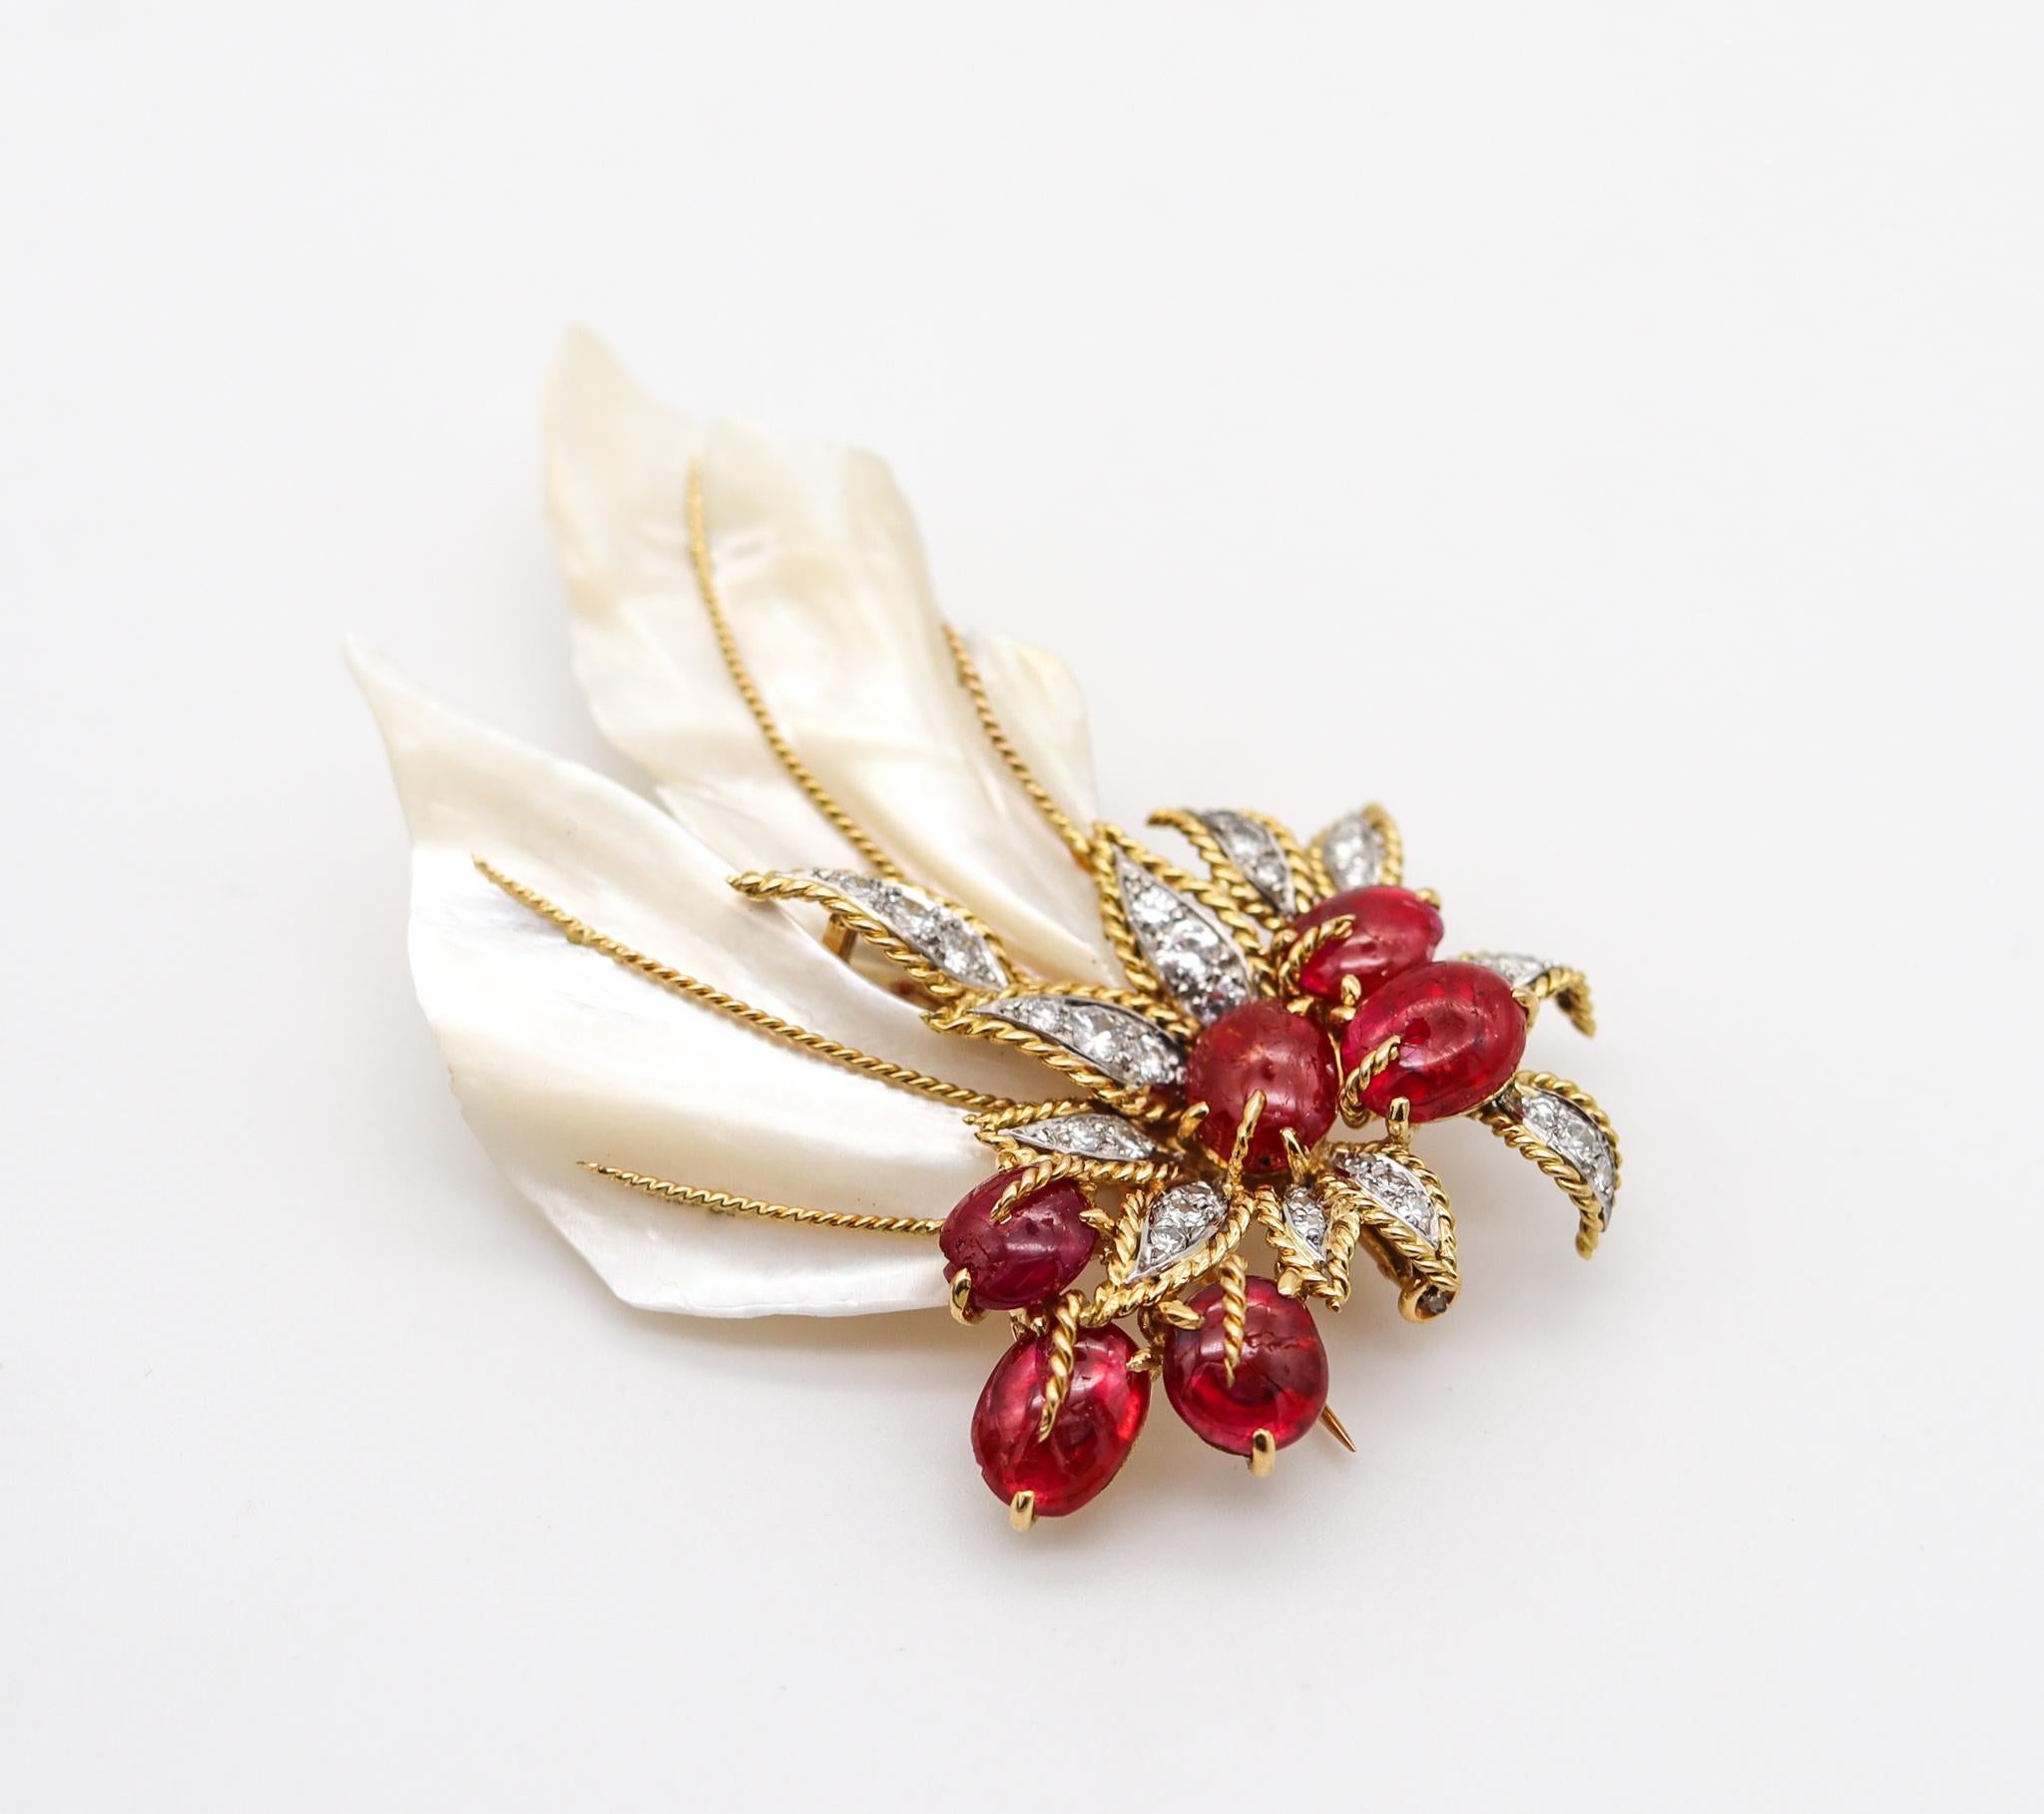 Brooch designed by Pierre Sterle (1905-1978).

This sculptural brooch is an important French piece of jewelry for a any collector. Was made in Paris at the atelier of Pierre Sterle during the post-war period, back in the 1960. This artistic piece